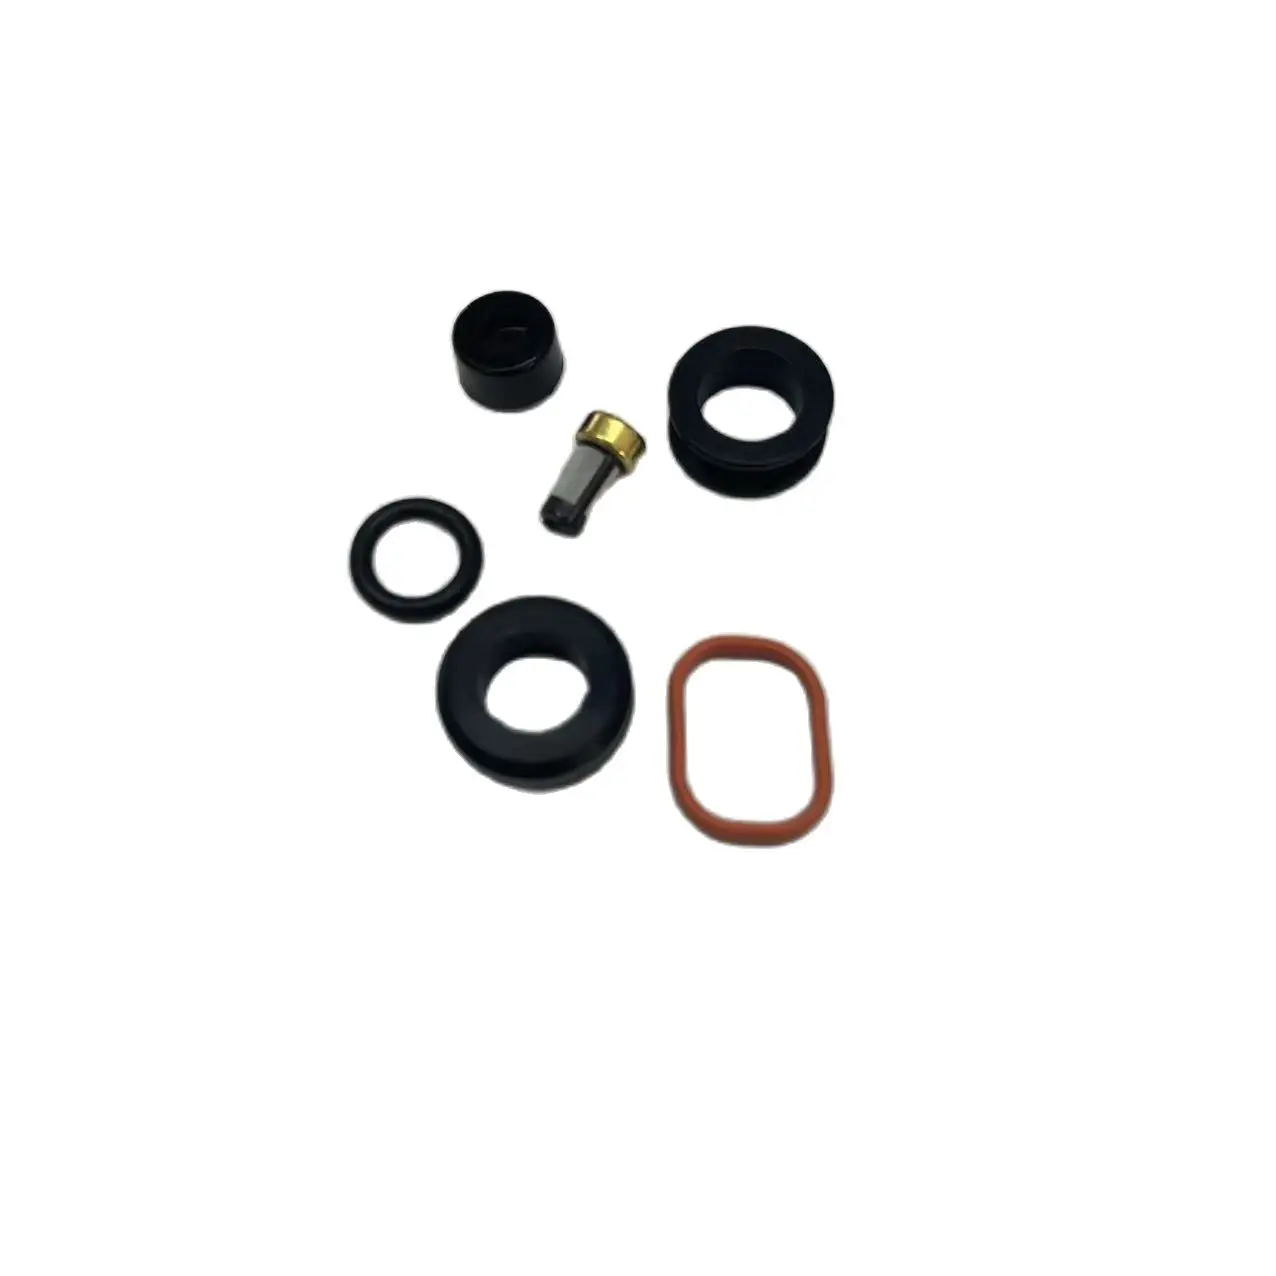 Fuel Injector Seal O-Ring Kit Seals Filters for Subaru WRX STI Forester 195500-3910 16611-AA510 (AY-RK106)